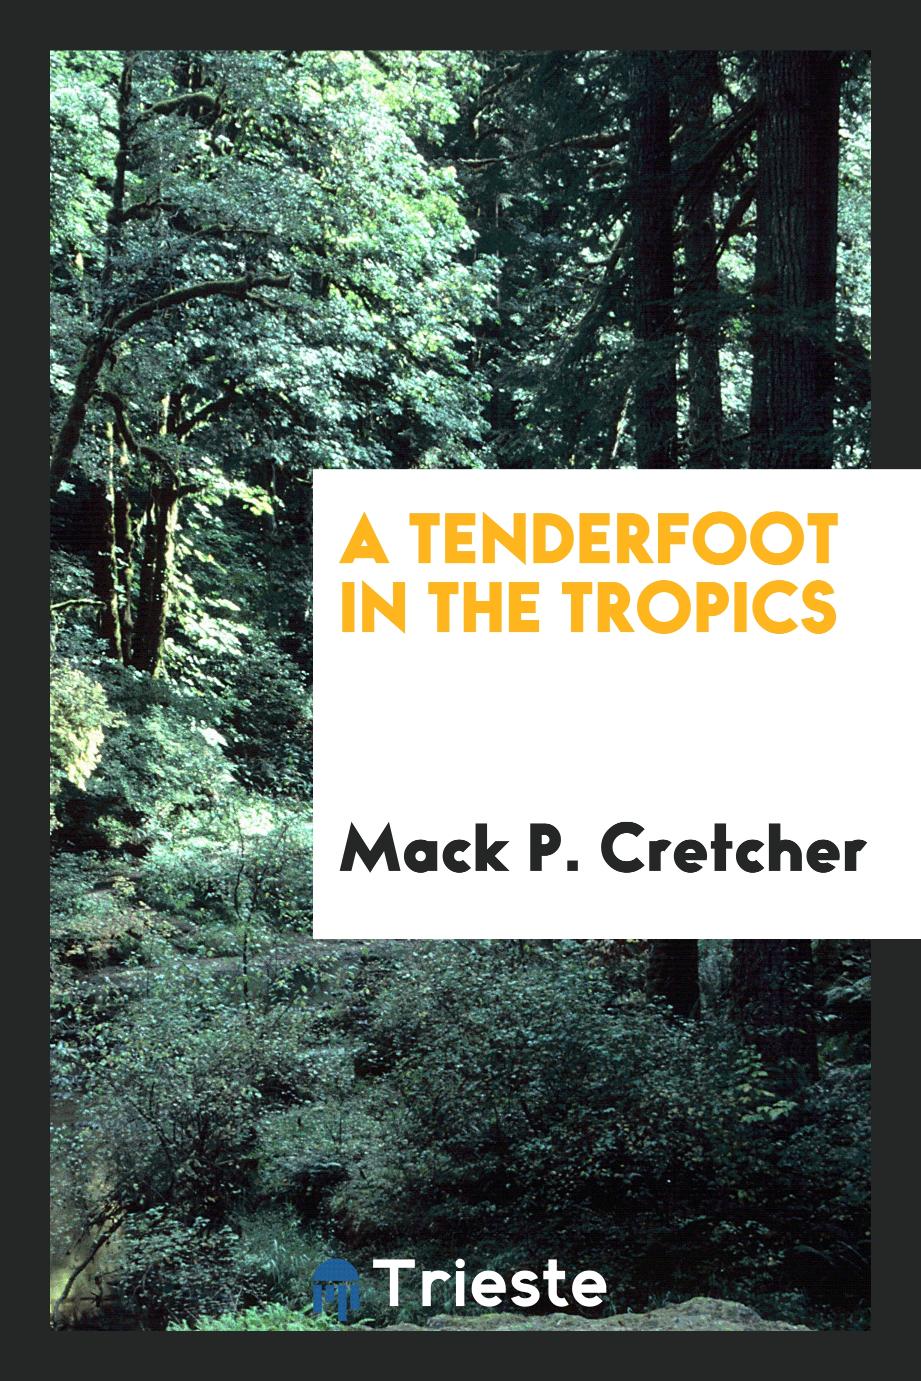 A tenderfoot in the tropics